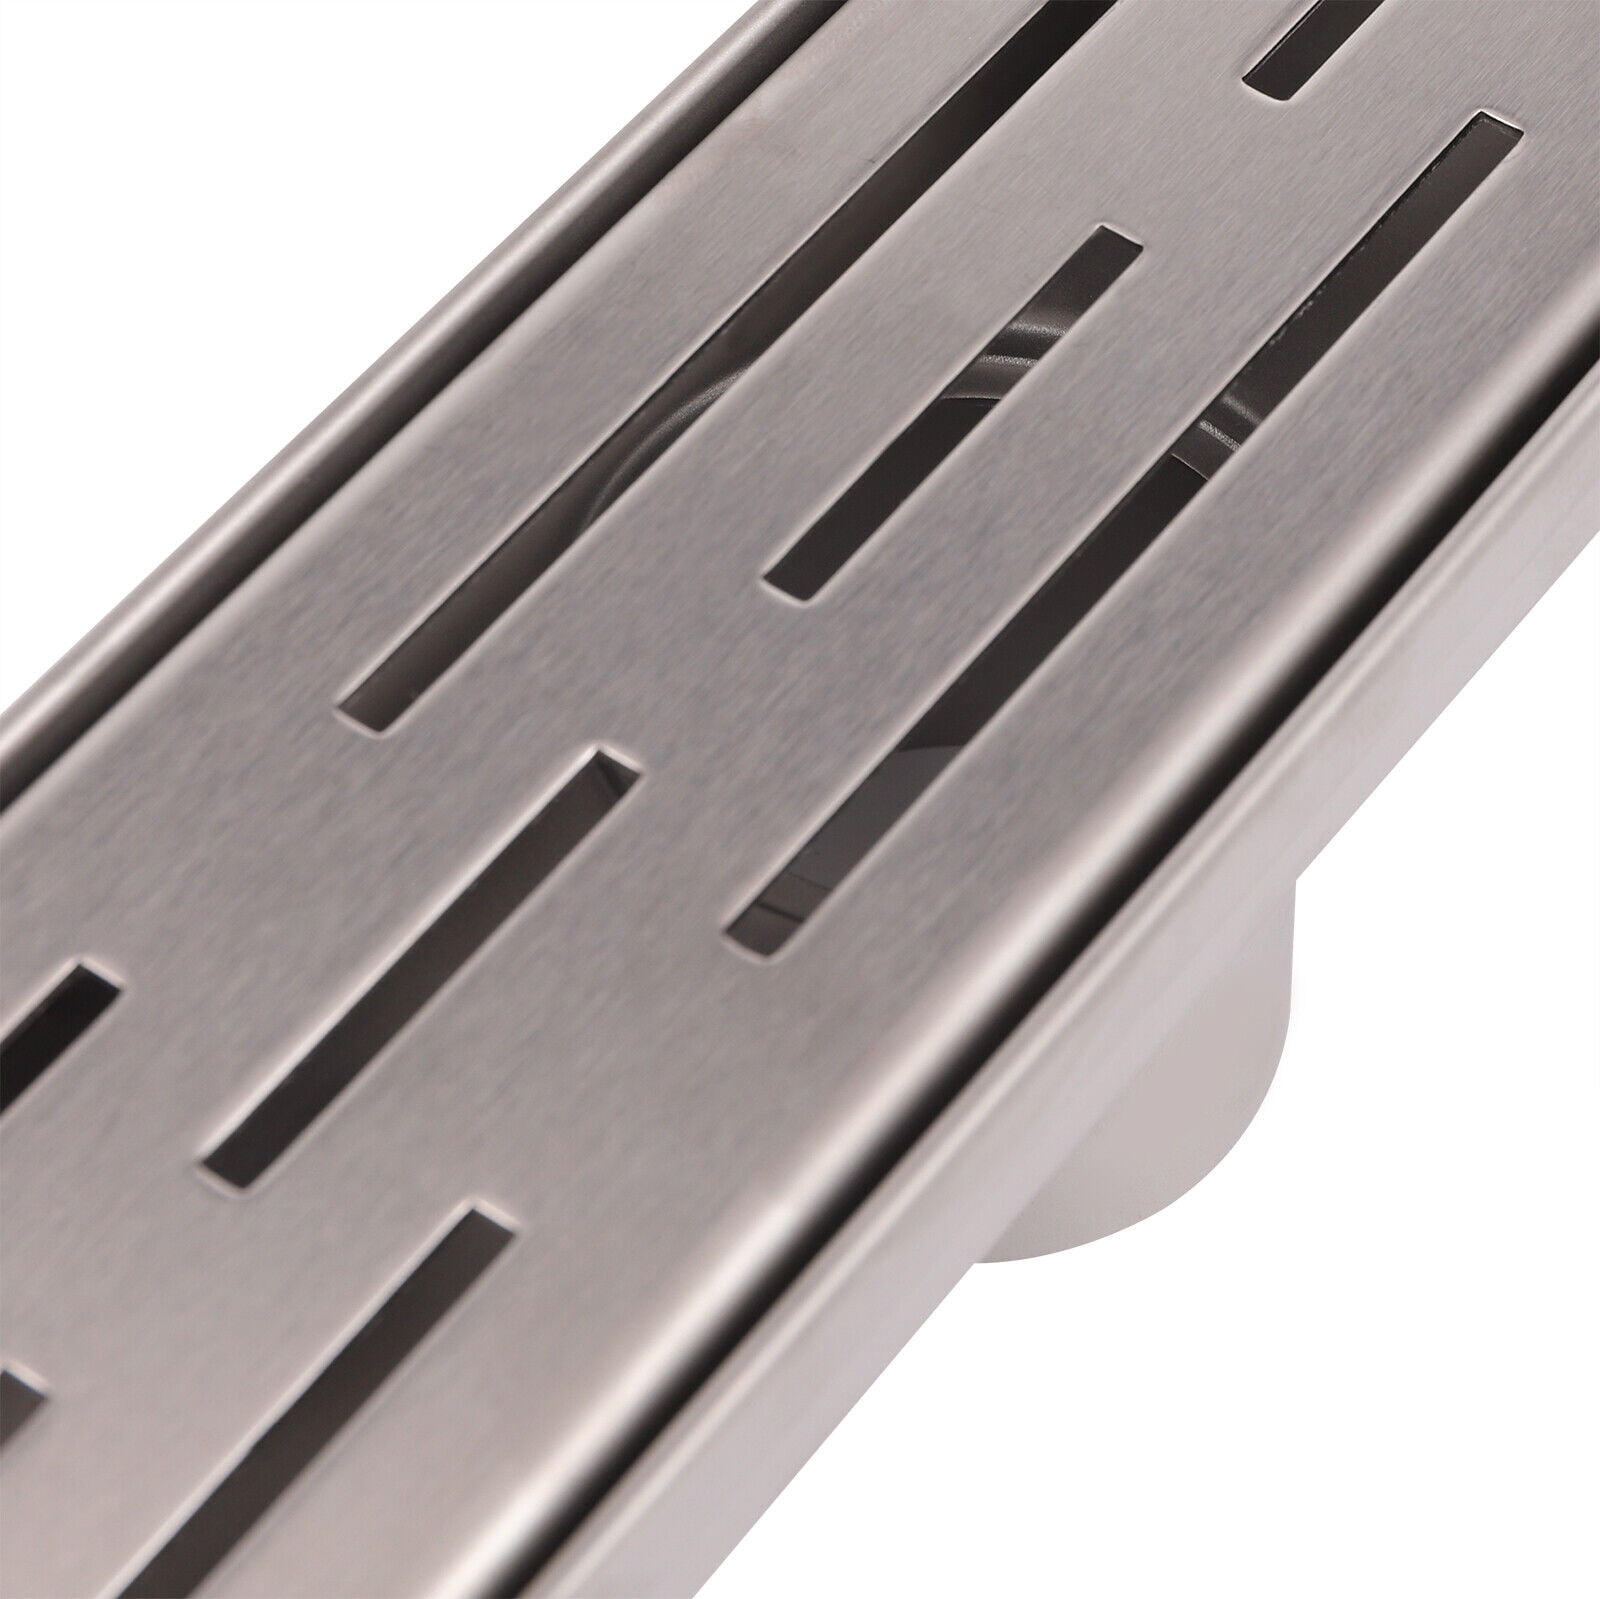 36 in. Linear Stainless Steel Shower Drain - Square Hole Pattern